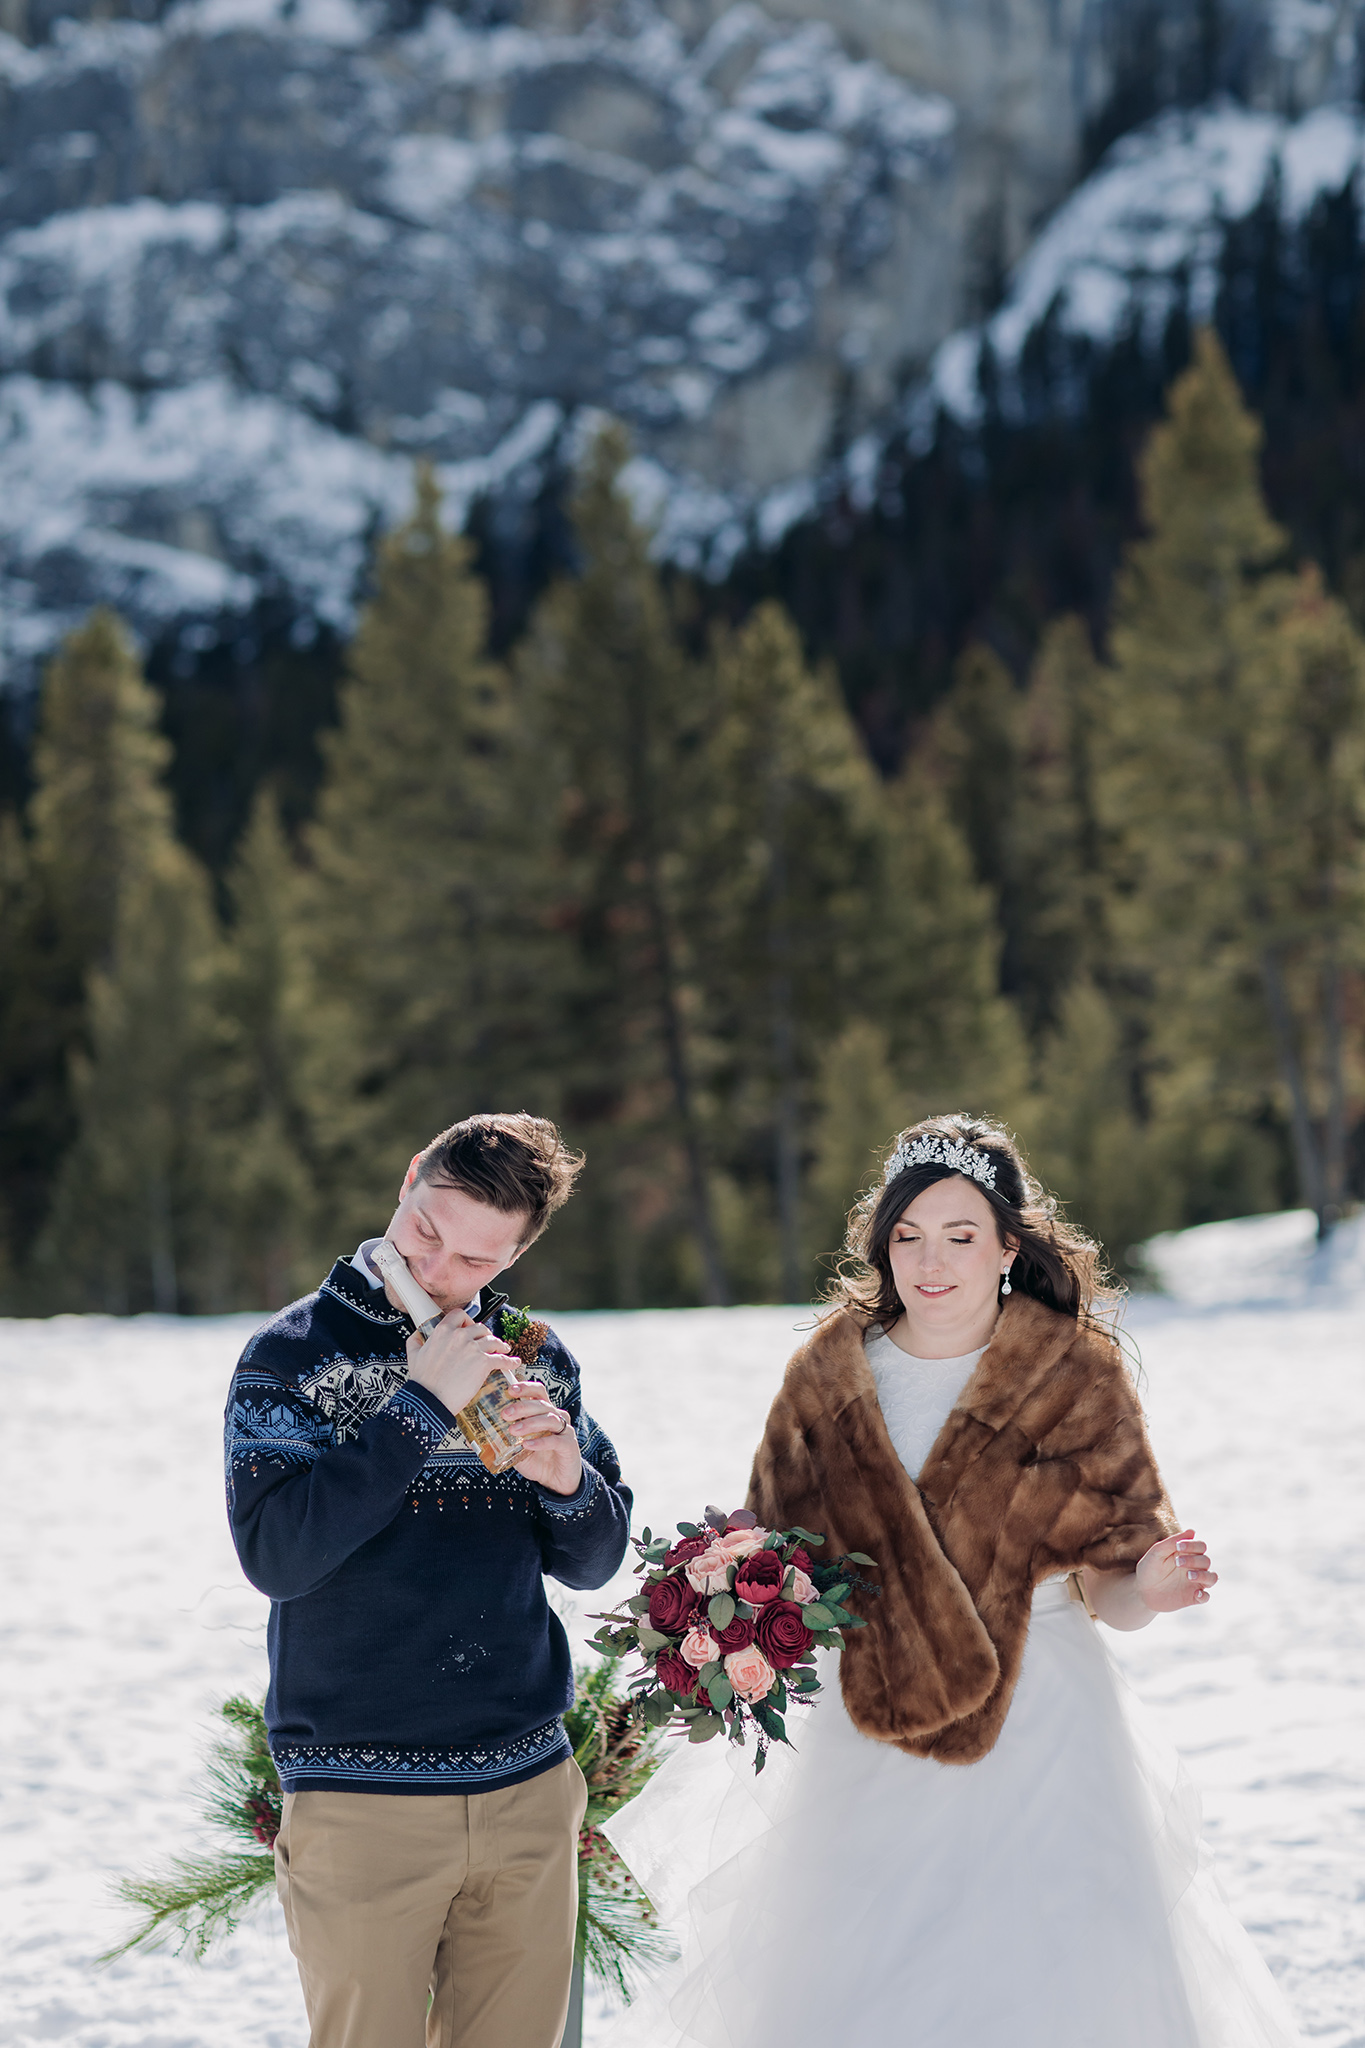 Tunnel Mountain winter wedding ceremony in Banff National Park photographed by ENV Photography champagne